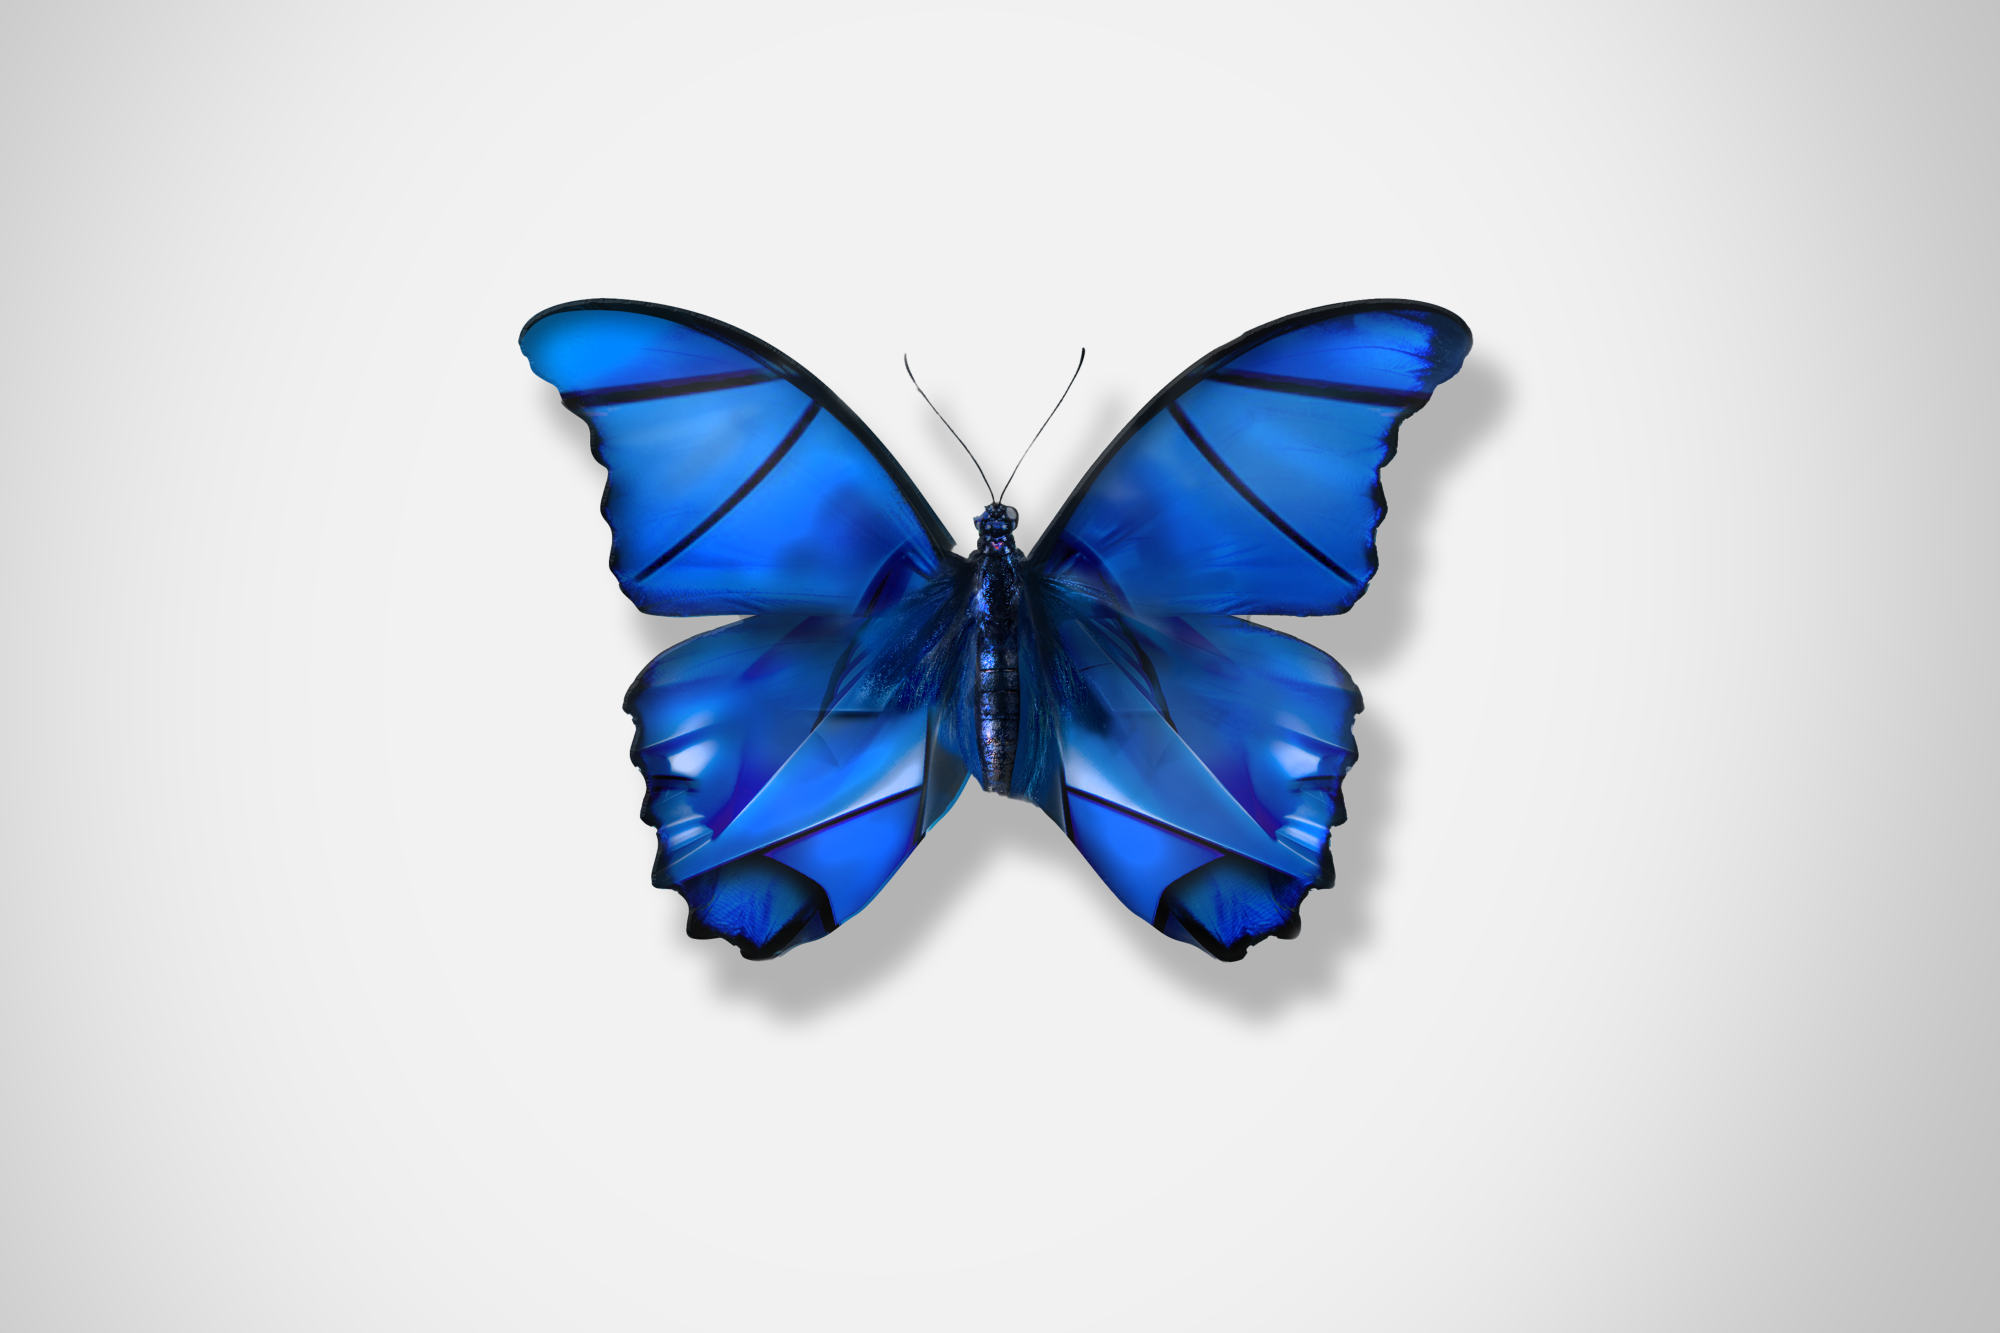 Ford_Butterflies_Concept_The_Beauty_Of_Change_DKLG_Design_012.png